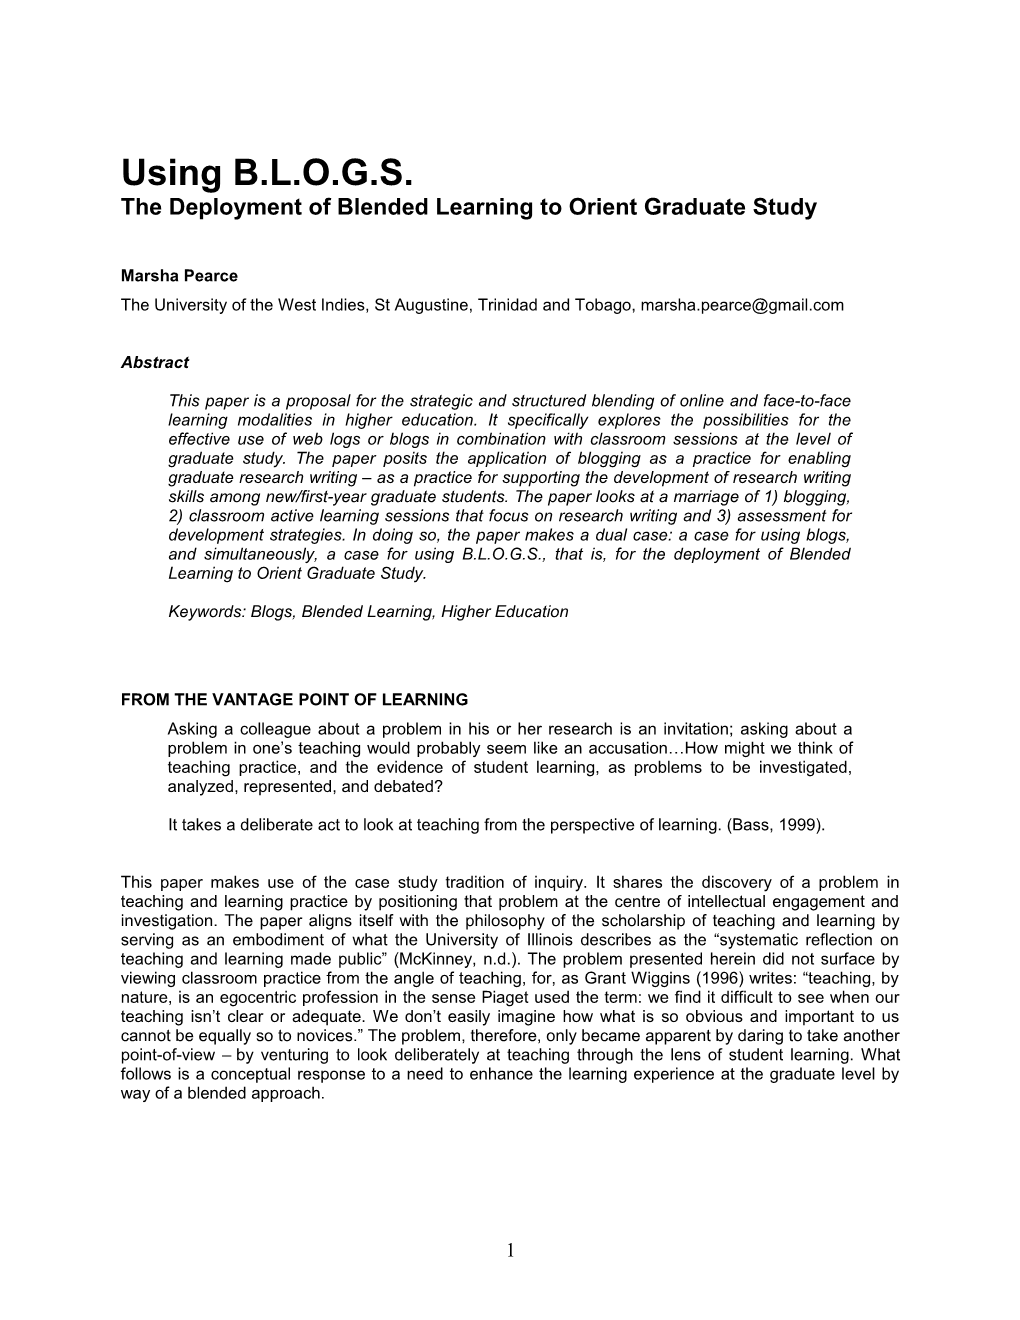 The Deployment of Blended Learning to Orient Graduate Study